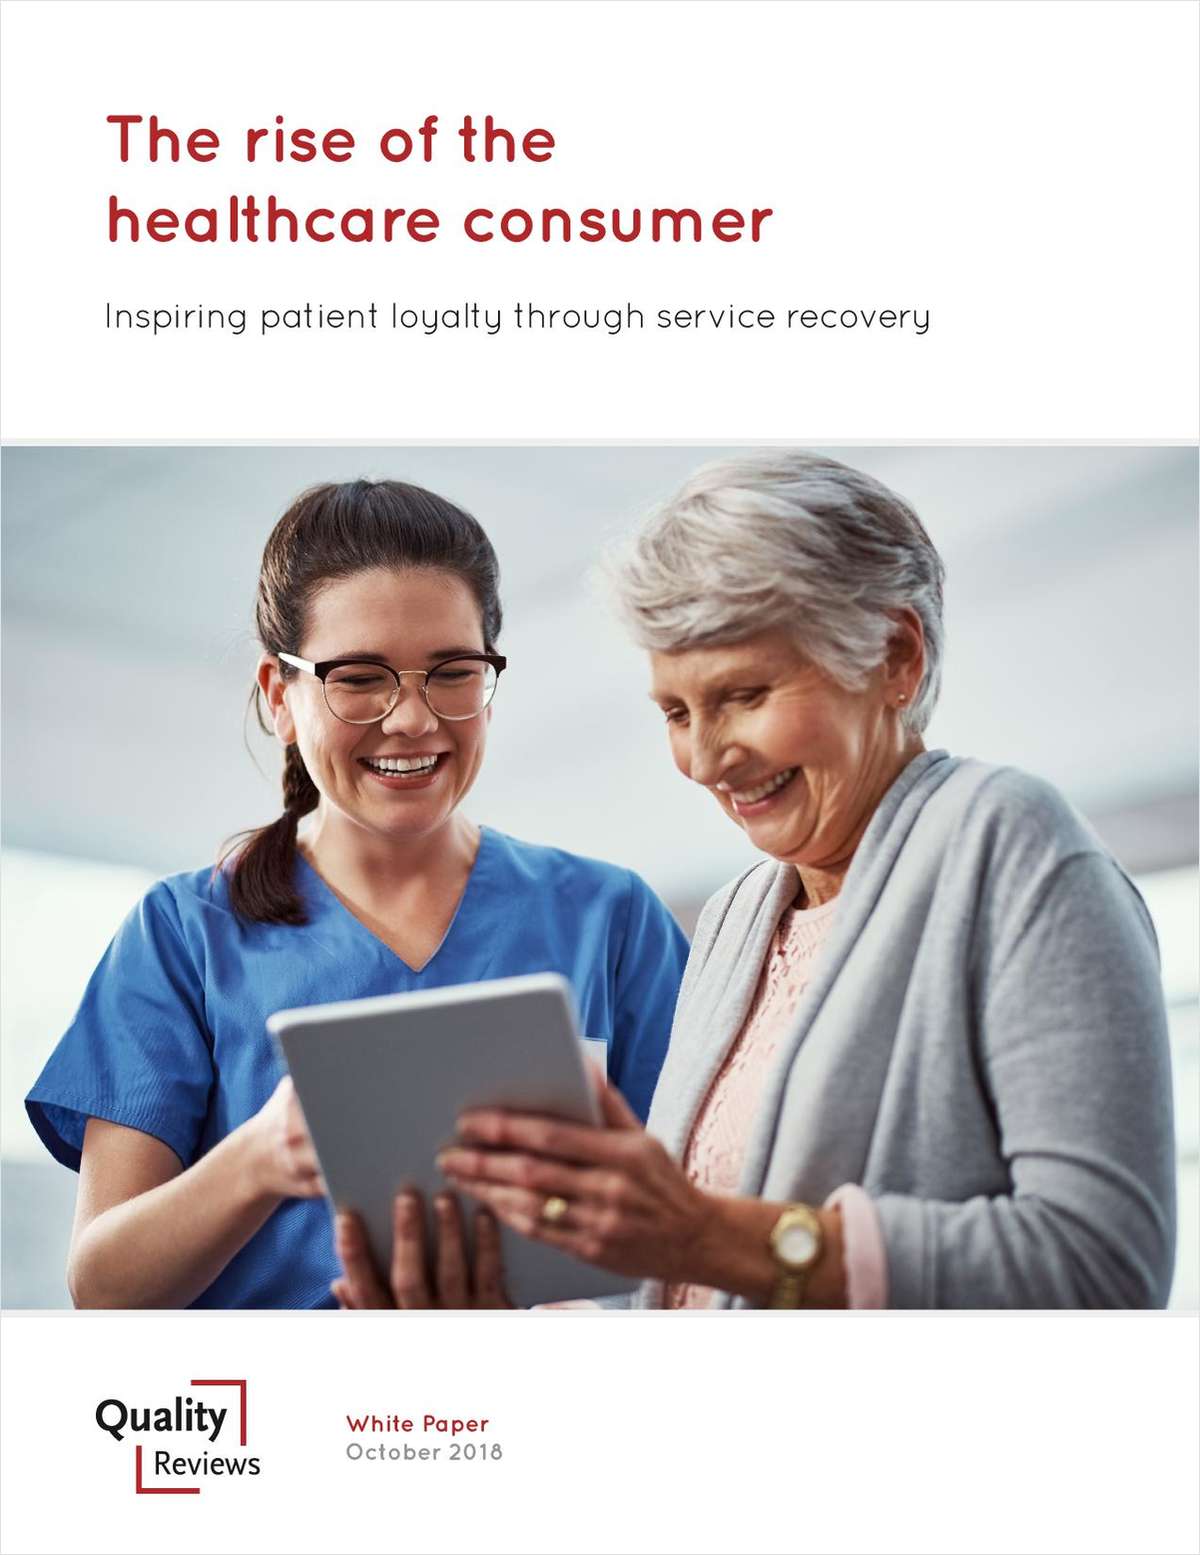 The Rise of the Healthcare Consumer: Inspiring Patient Loyalty Through Service Recovery